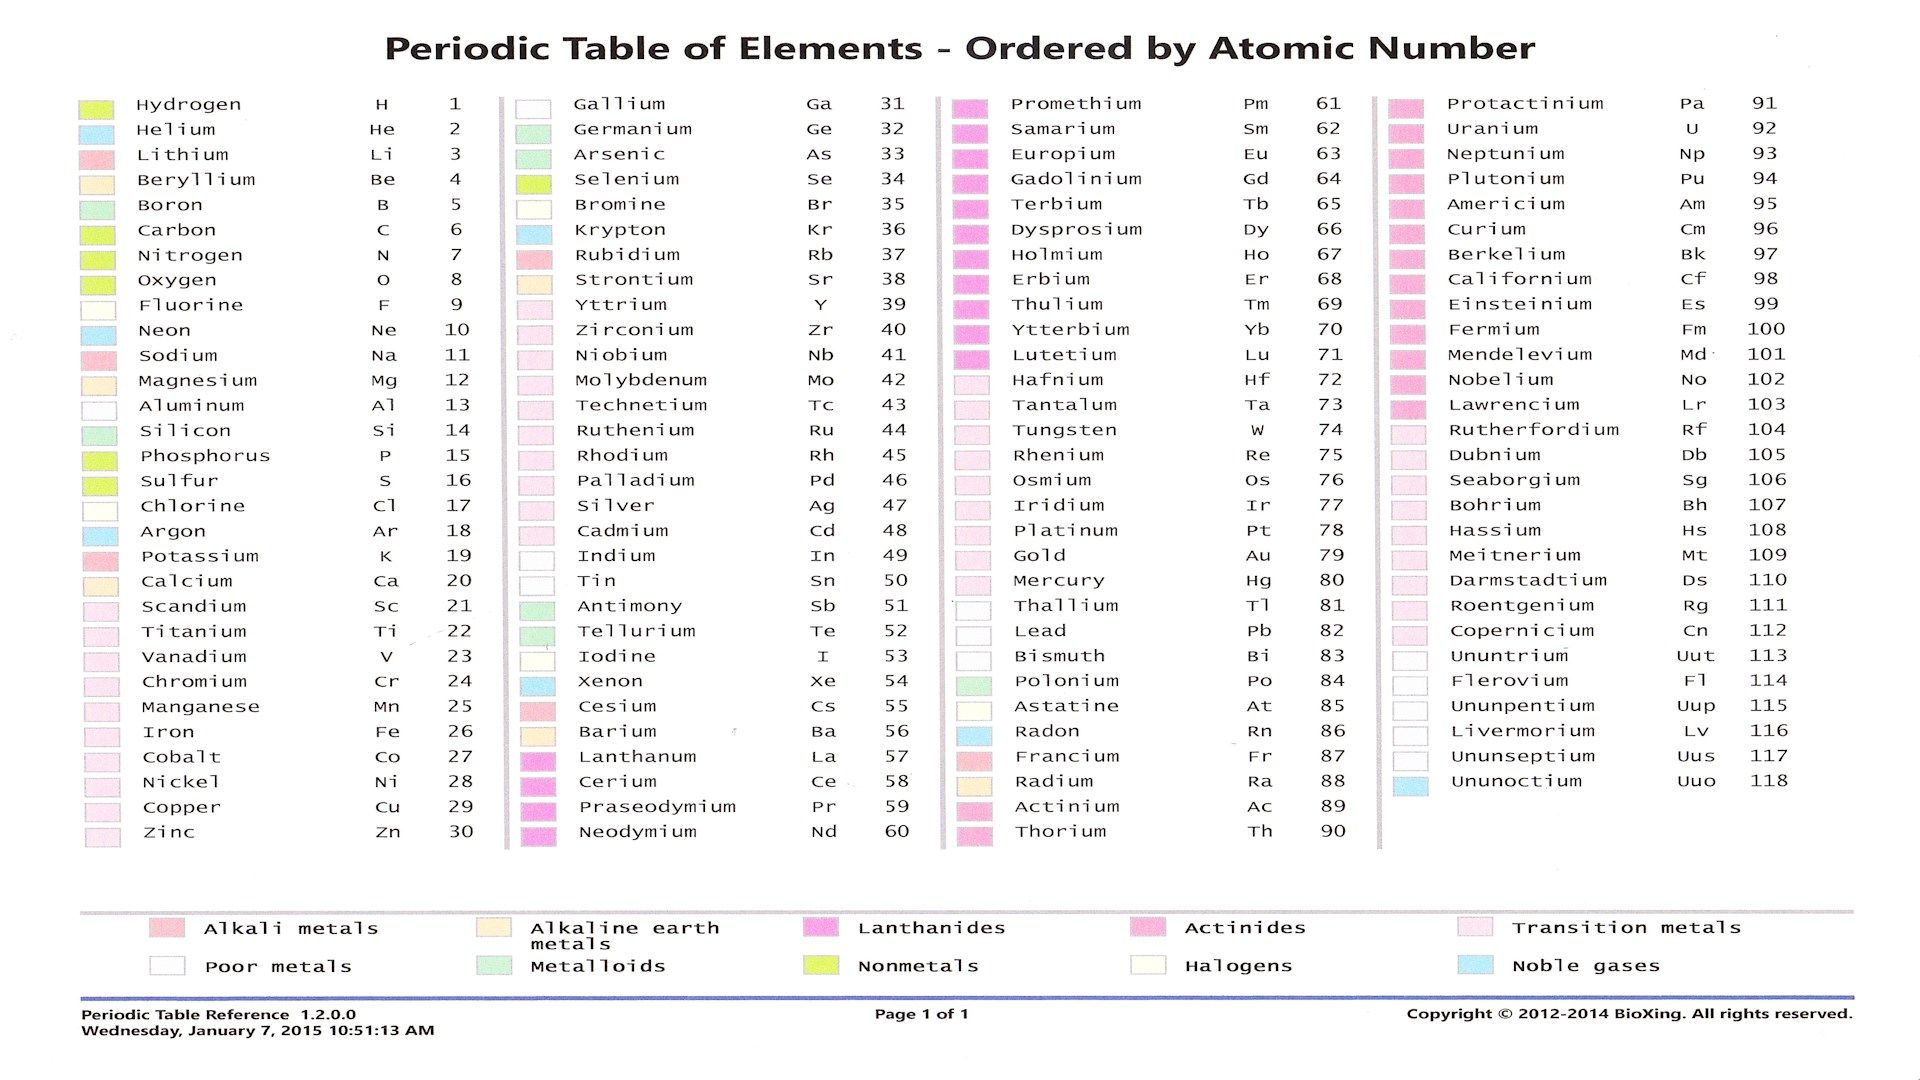 Alphabetical List of elements by Element Name.